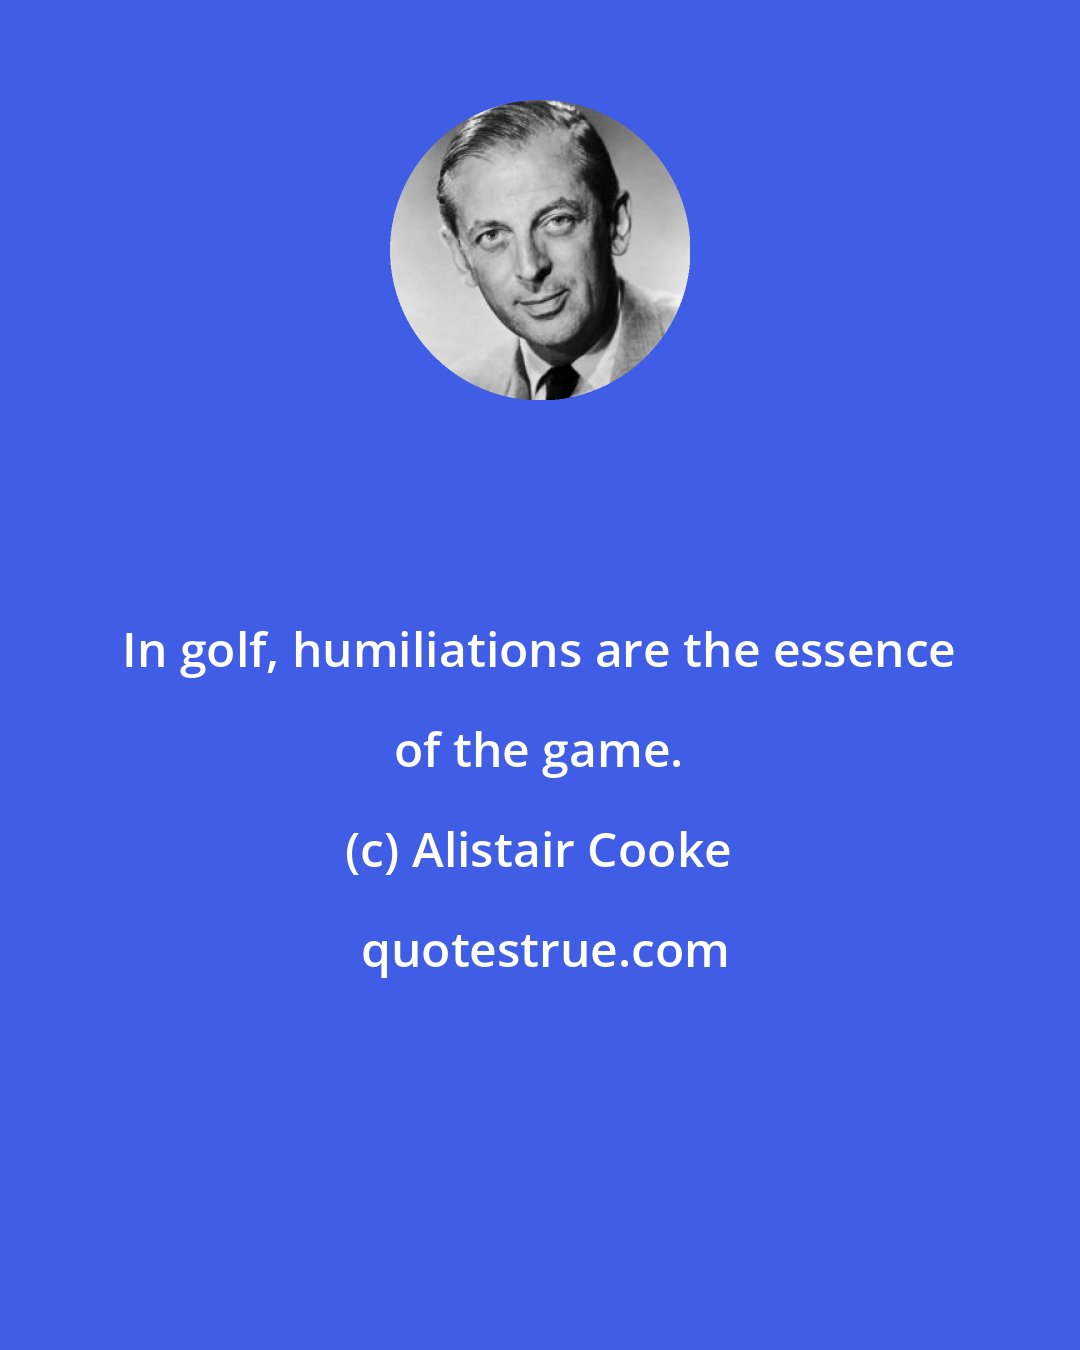 Alistair Cooke: In golf, humiliations are the essence of the game.